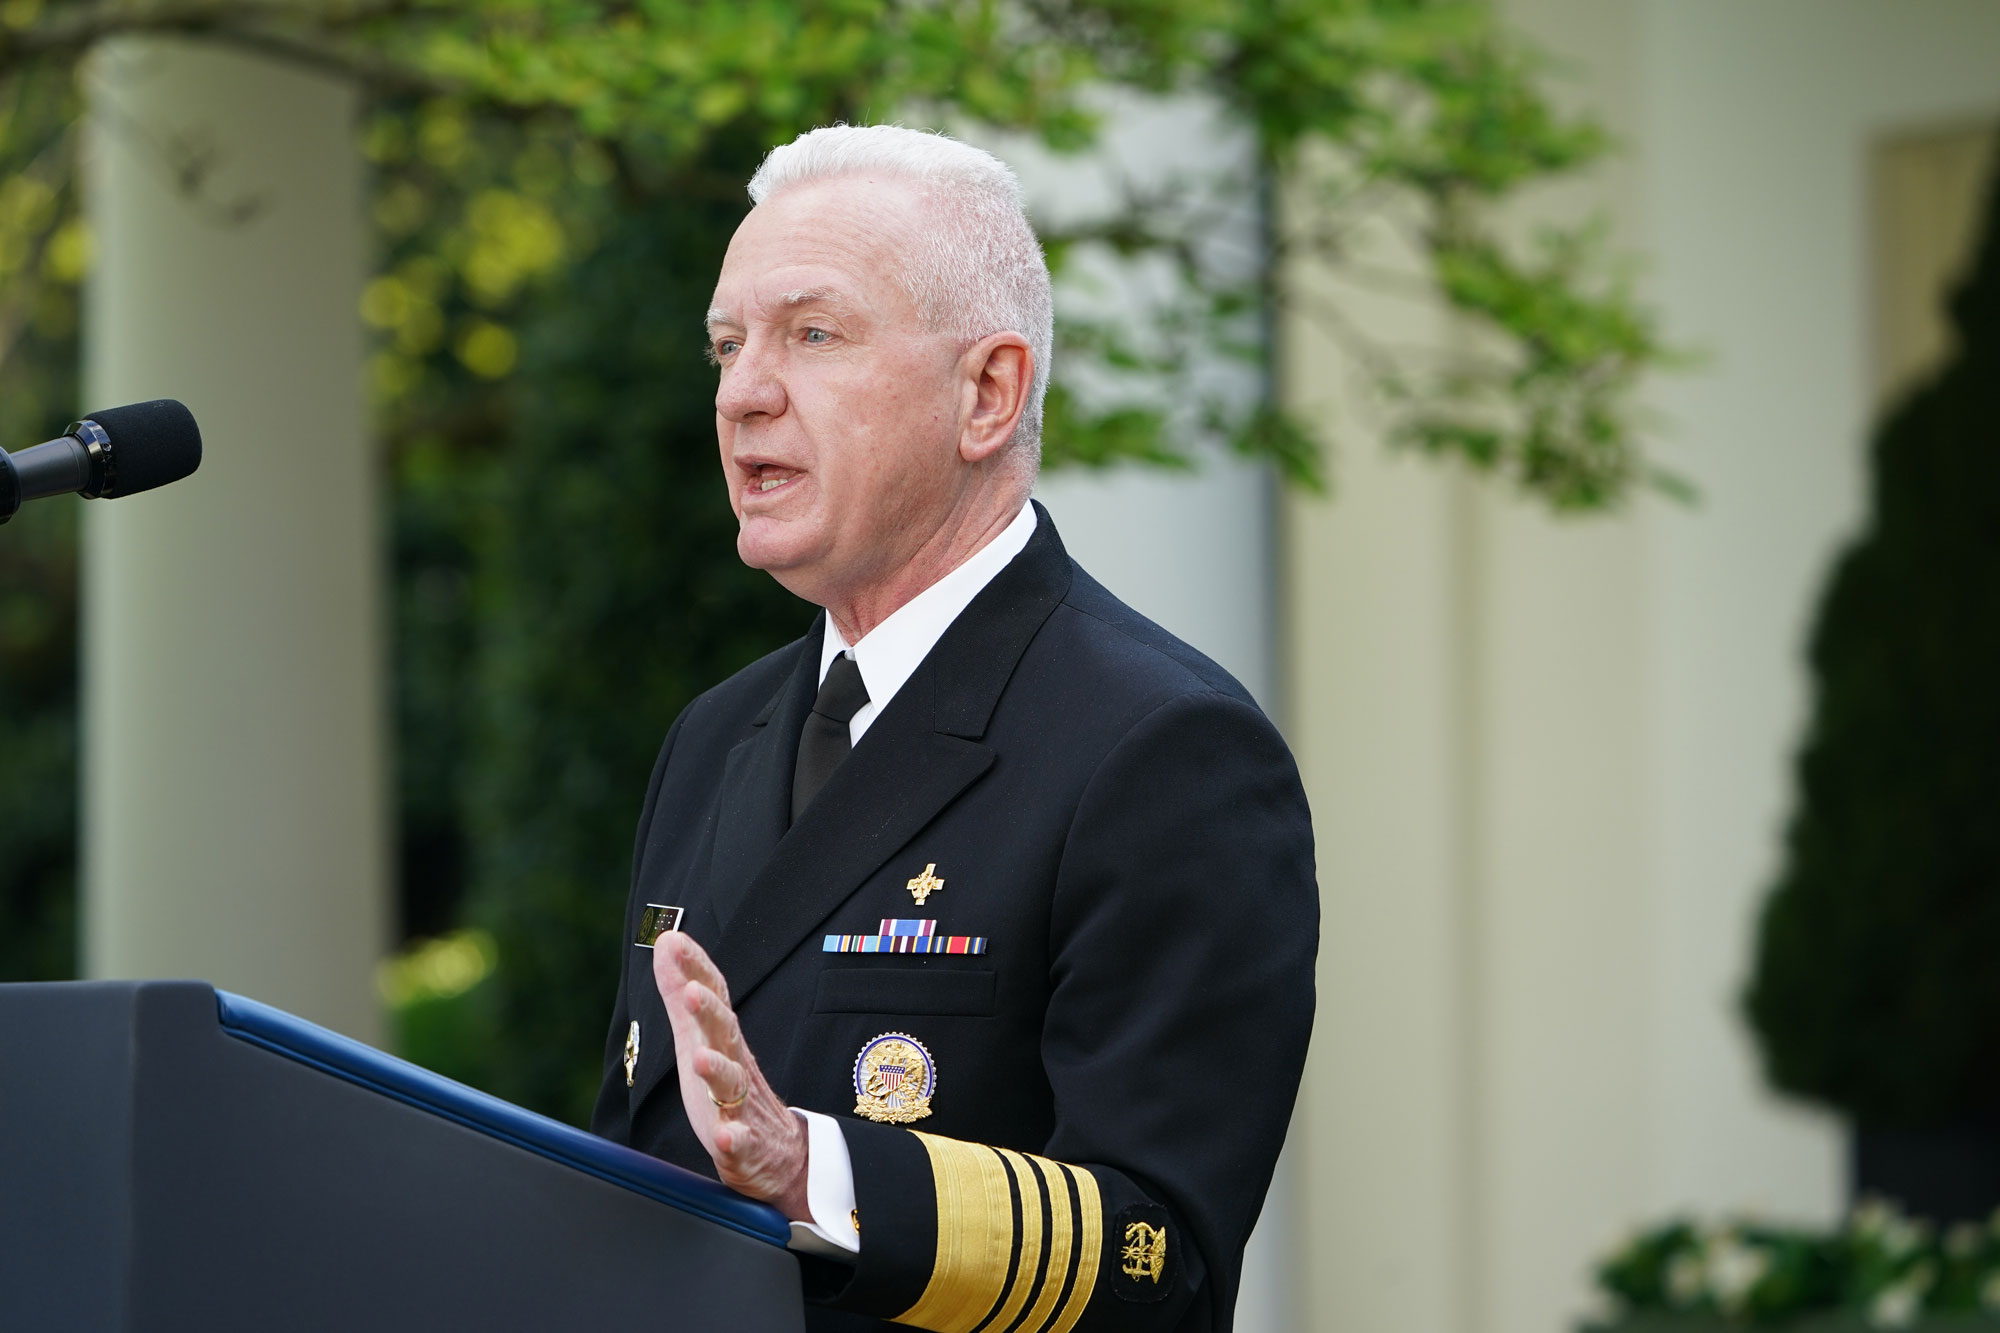 Assistant Secretary for Health Admiral Brett Giroir speaks during a news conference in the Rose Garden of the White House in Washington, on April 27.